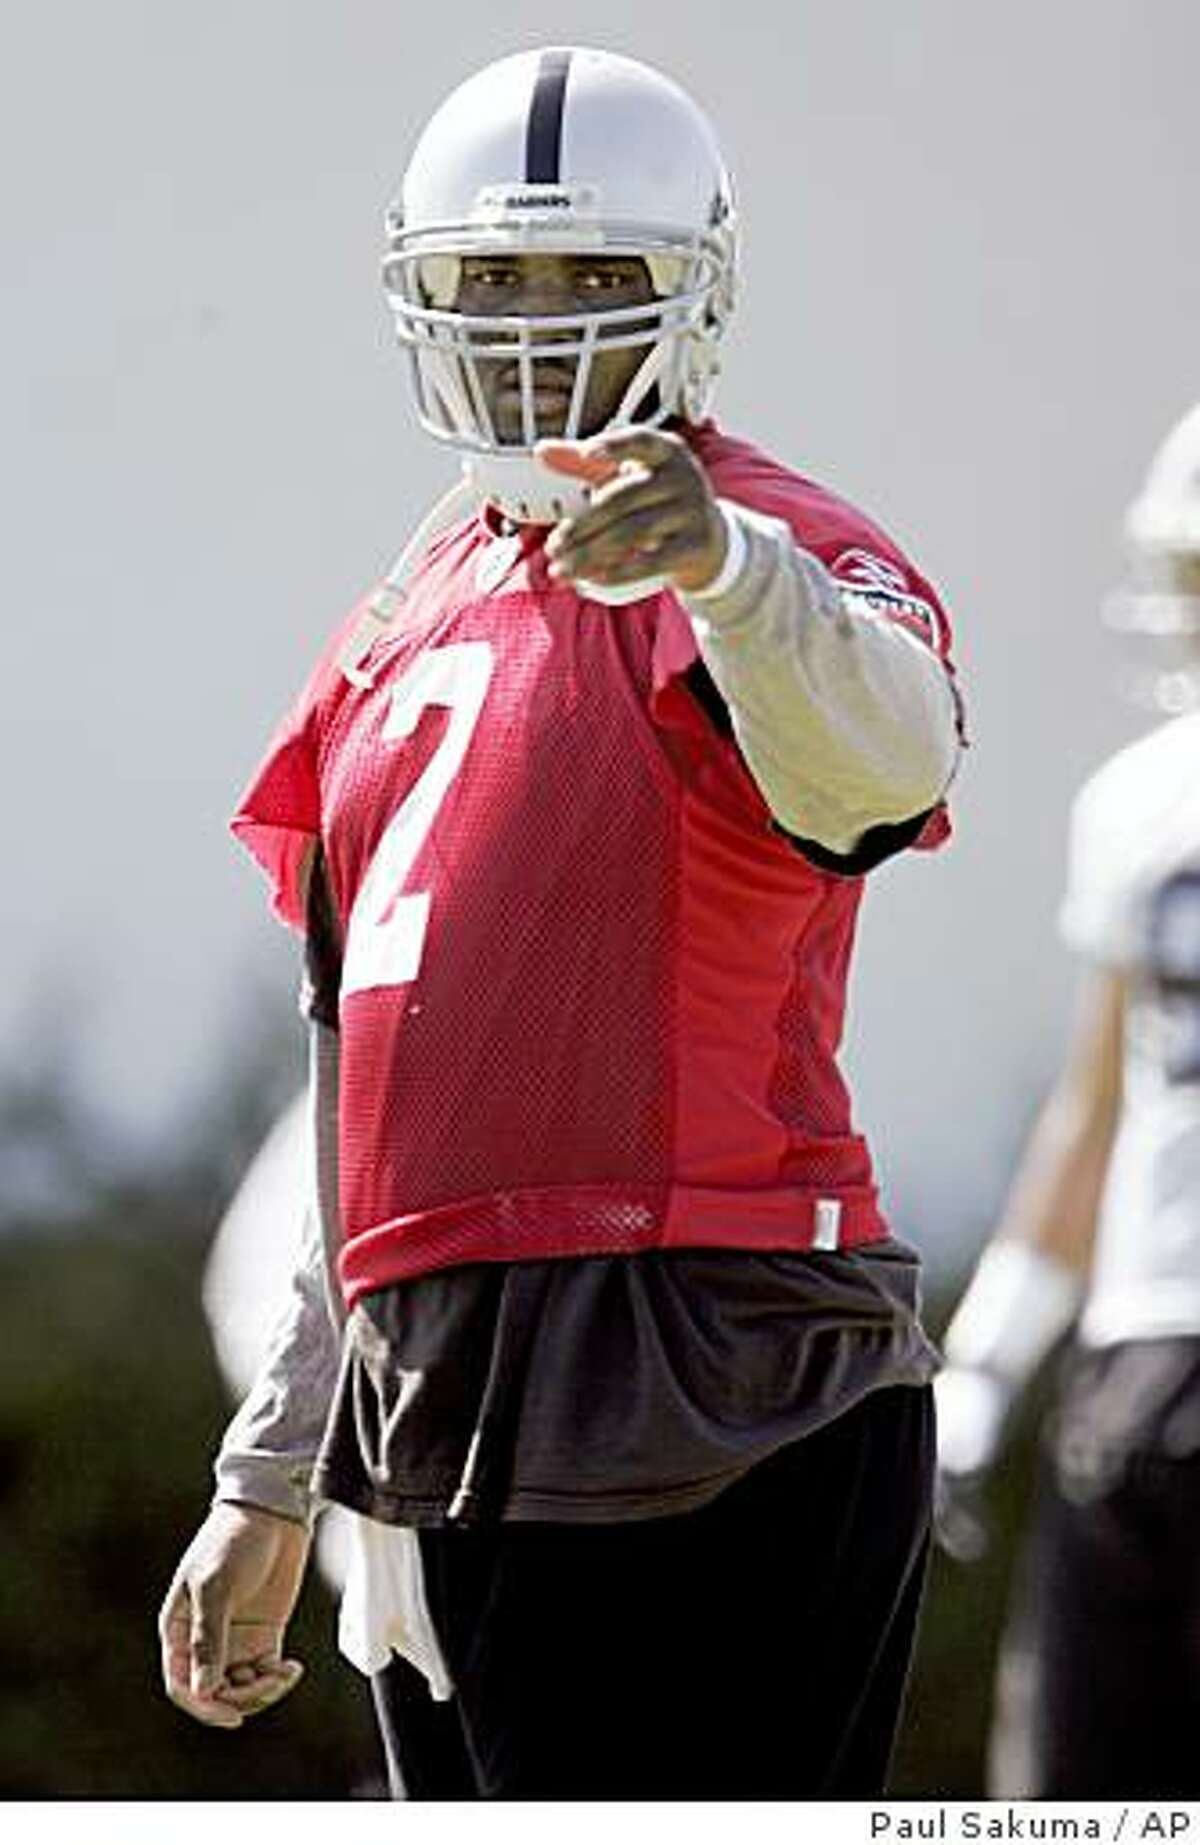 Oakland Raiders quarterback JaMarcus Russell (2) points during practice at Raiders headquarters in Alameda, Calif., Wednesday, May 20, 2009.